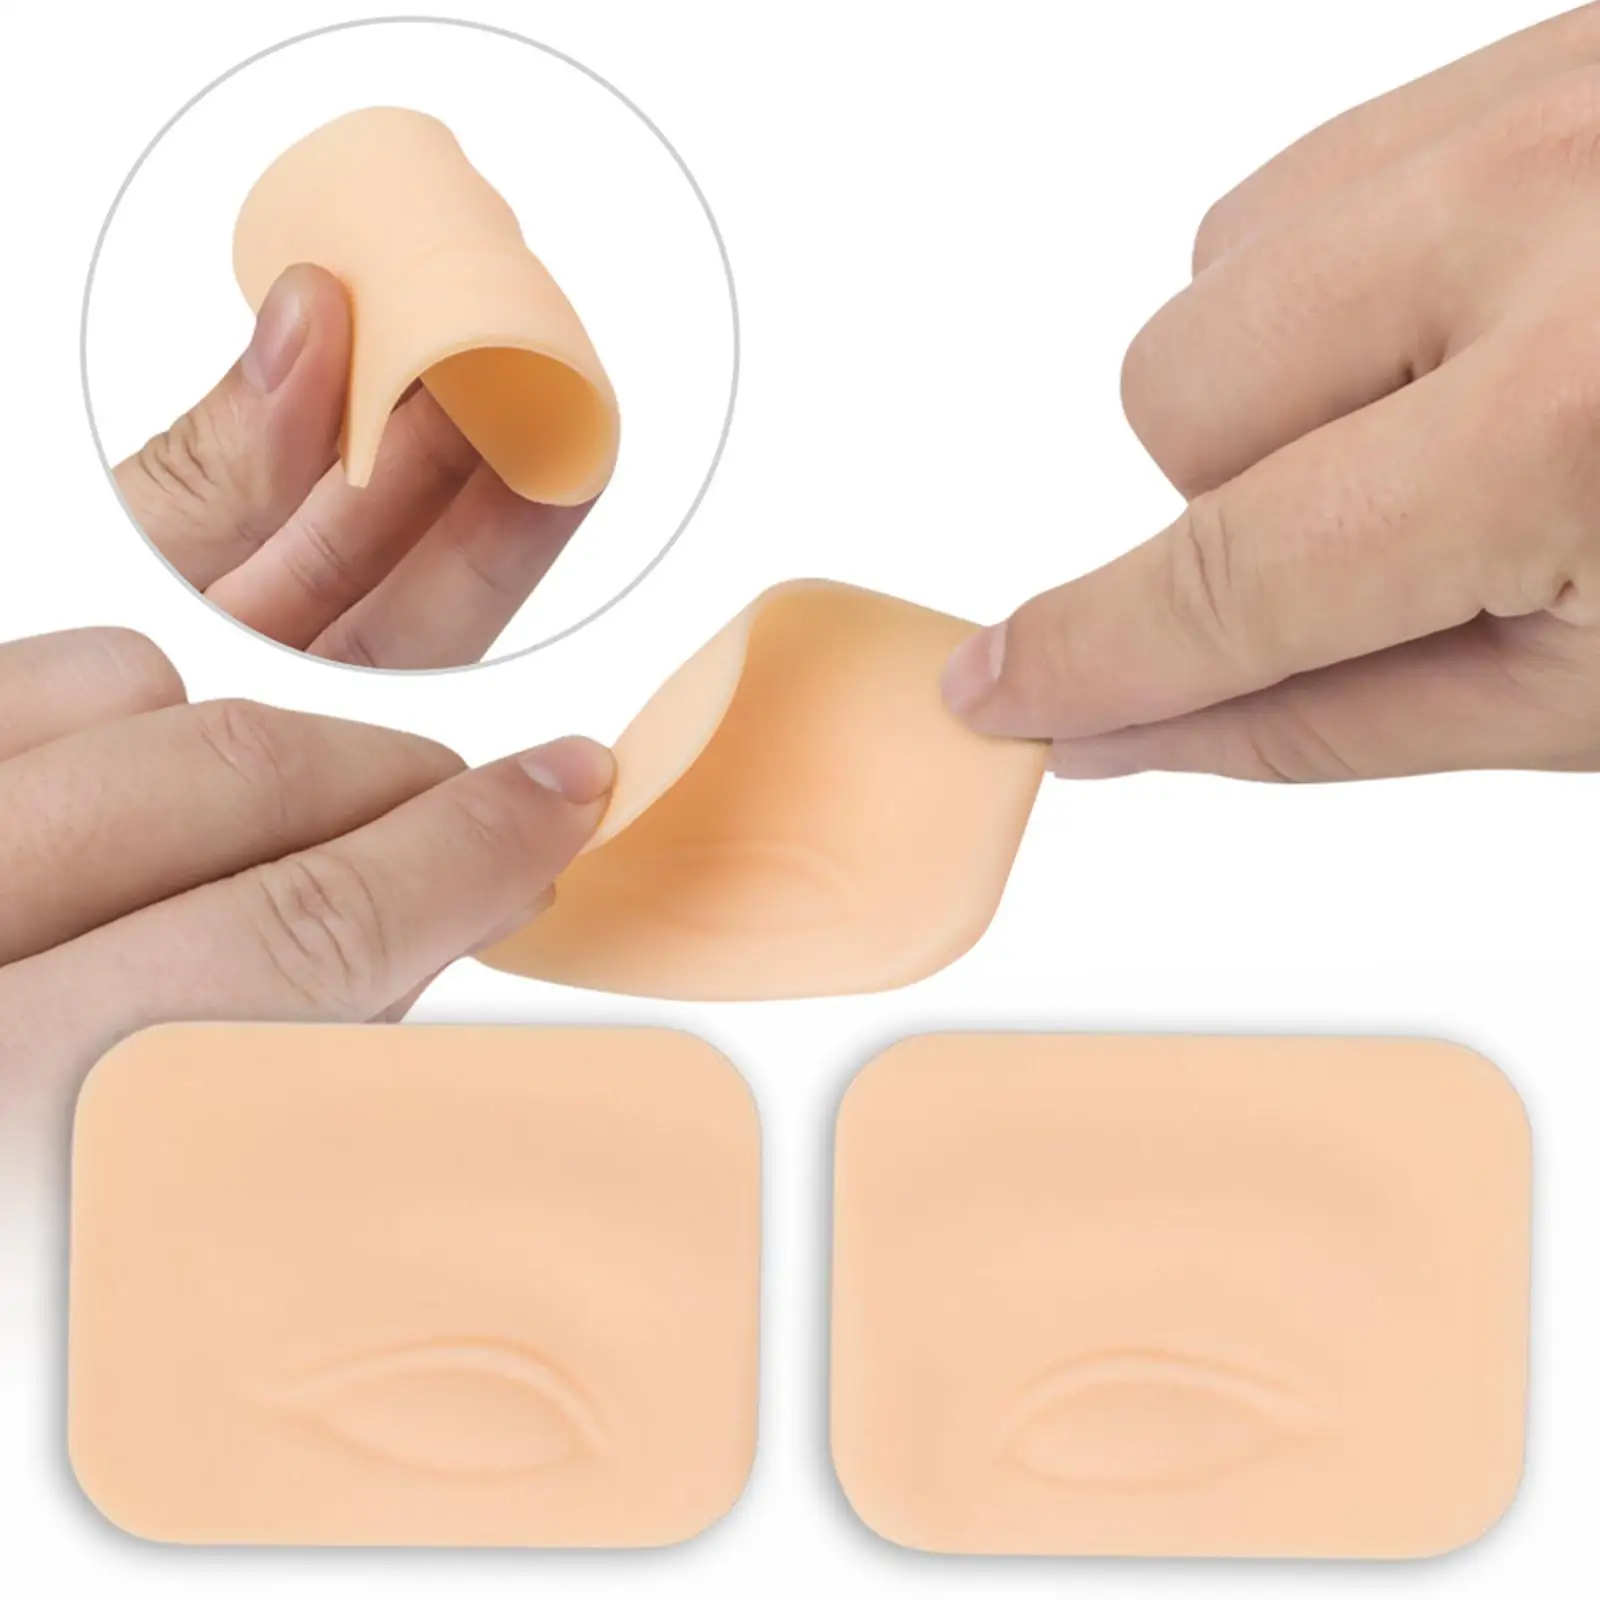 Silicone face Makeup Practice Board Reusable Eyelash Lashes pad for Beginner Practicing Makeup